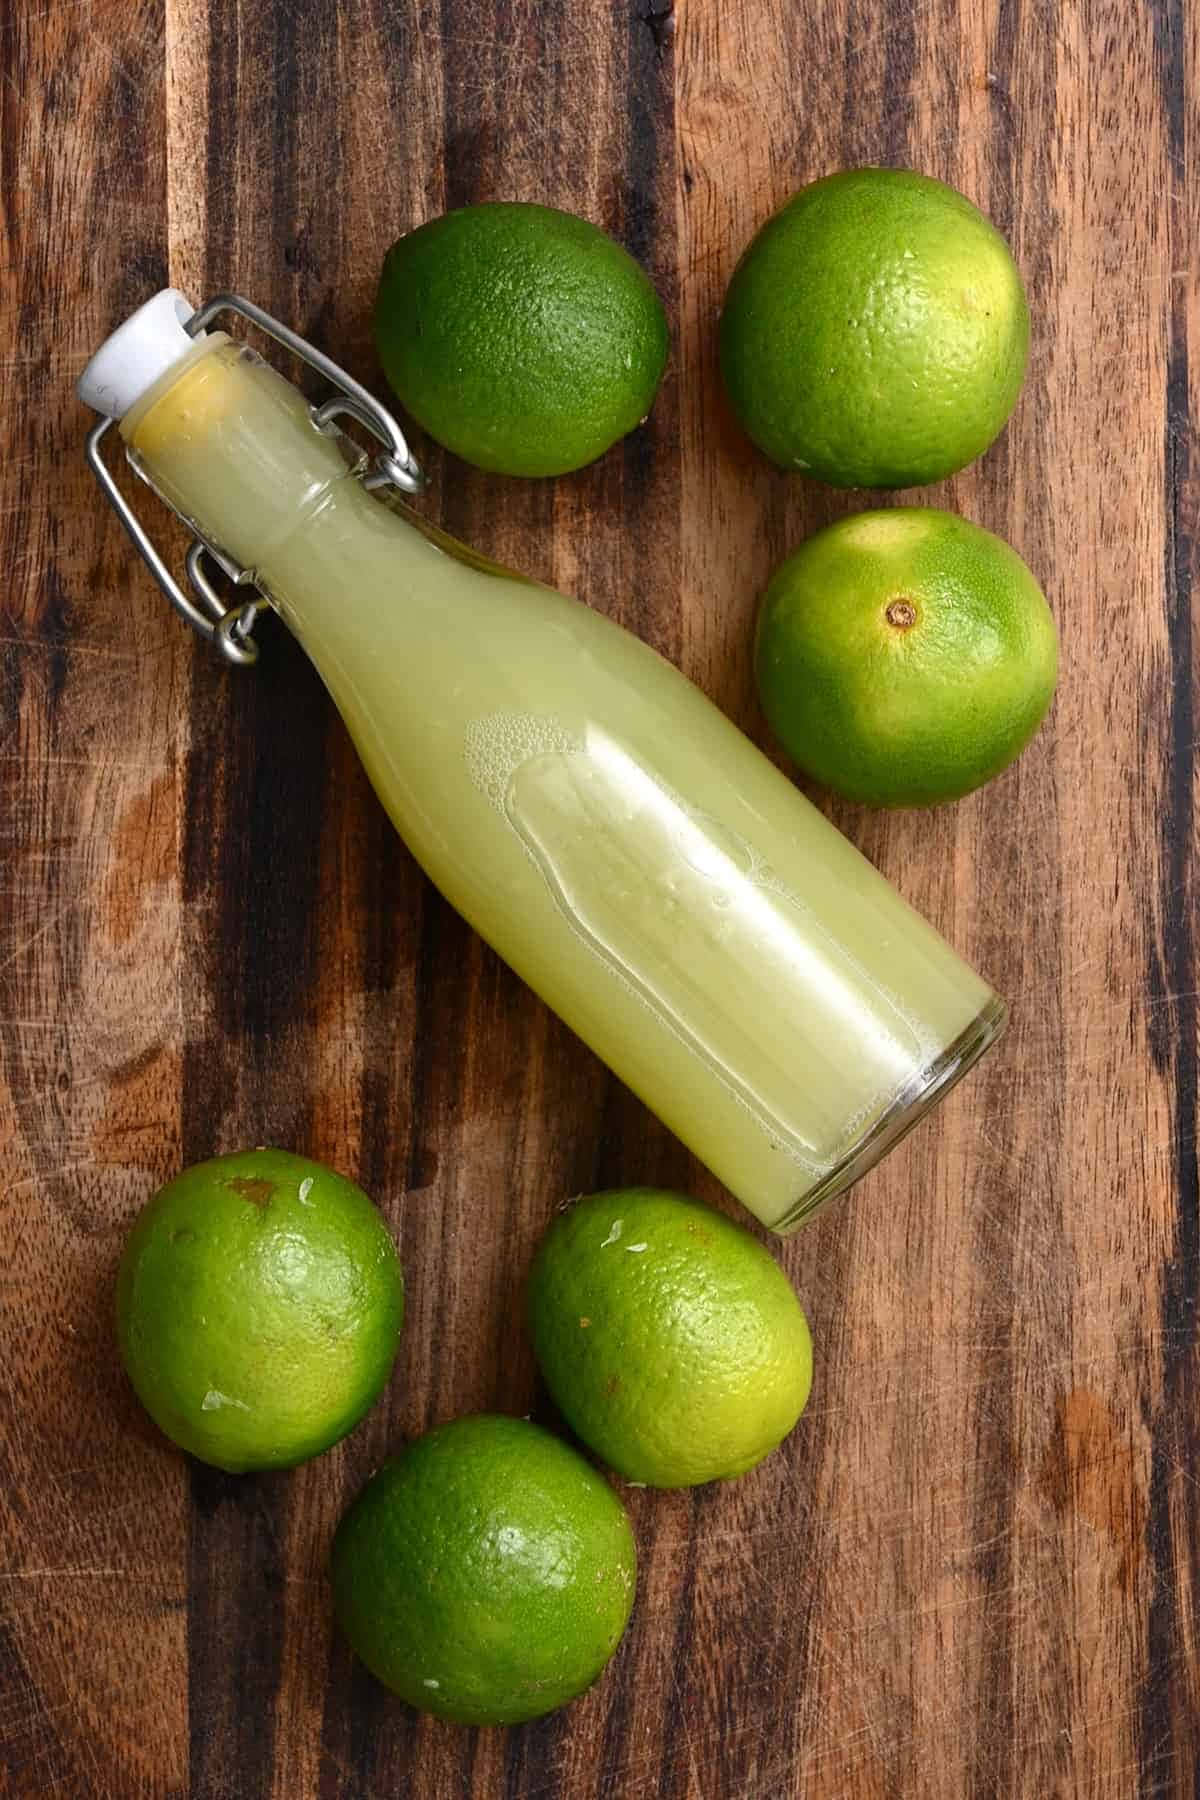 Refresh yourself with a tasty Lime today!